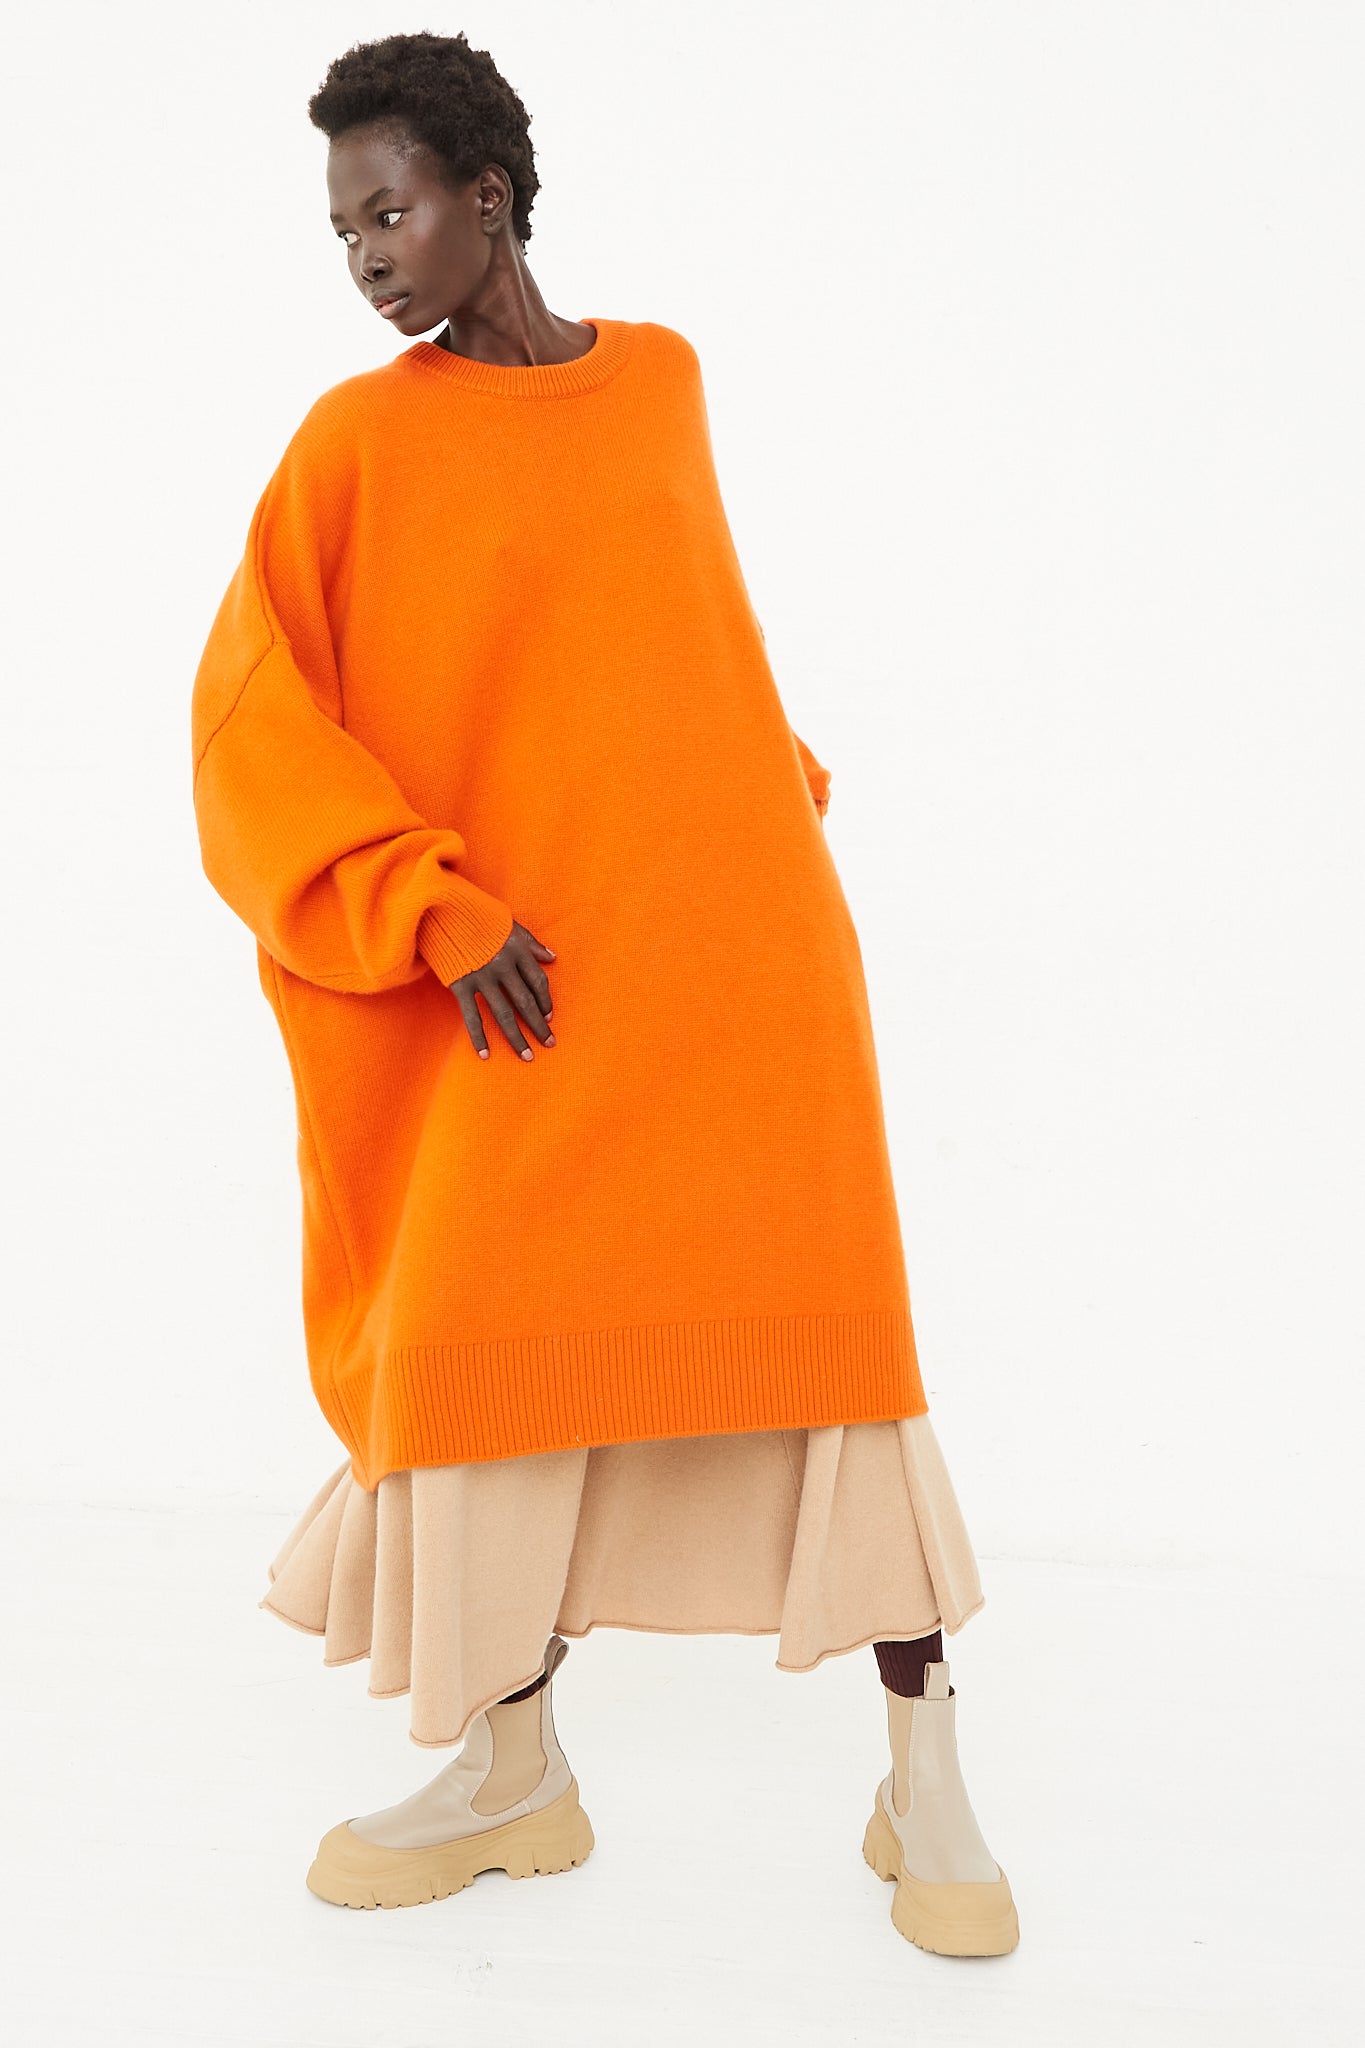 A model wearing the Extreme Cashmere No. 303 Sandra Dress in Maple posing in front of a white background at Oroboro store.